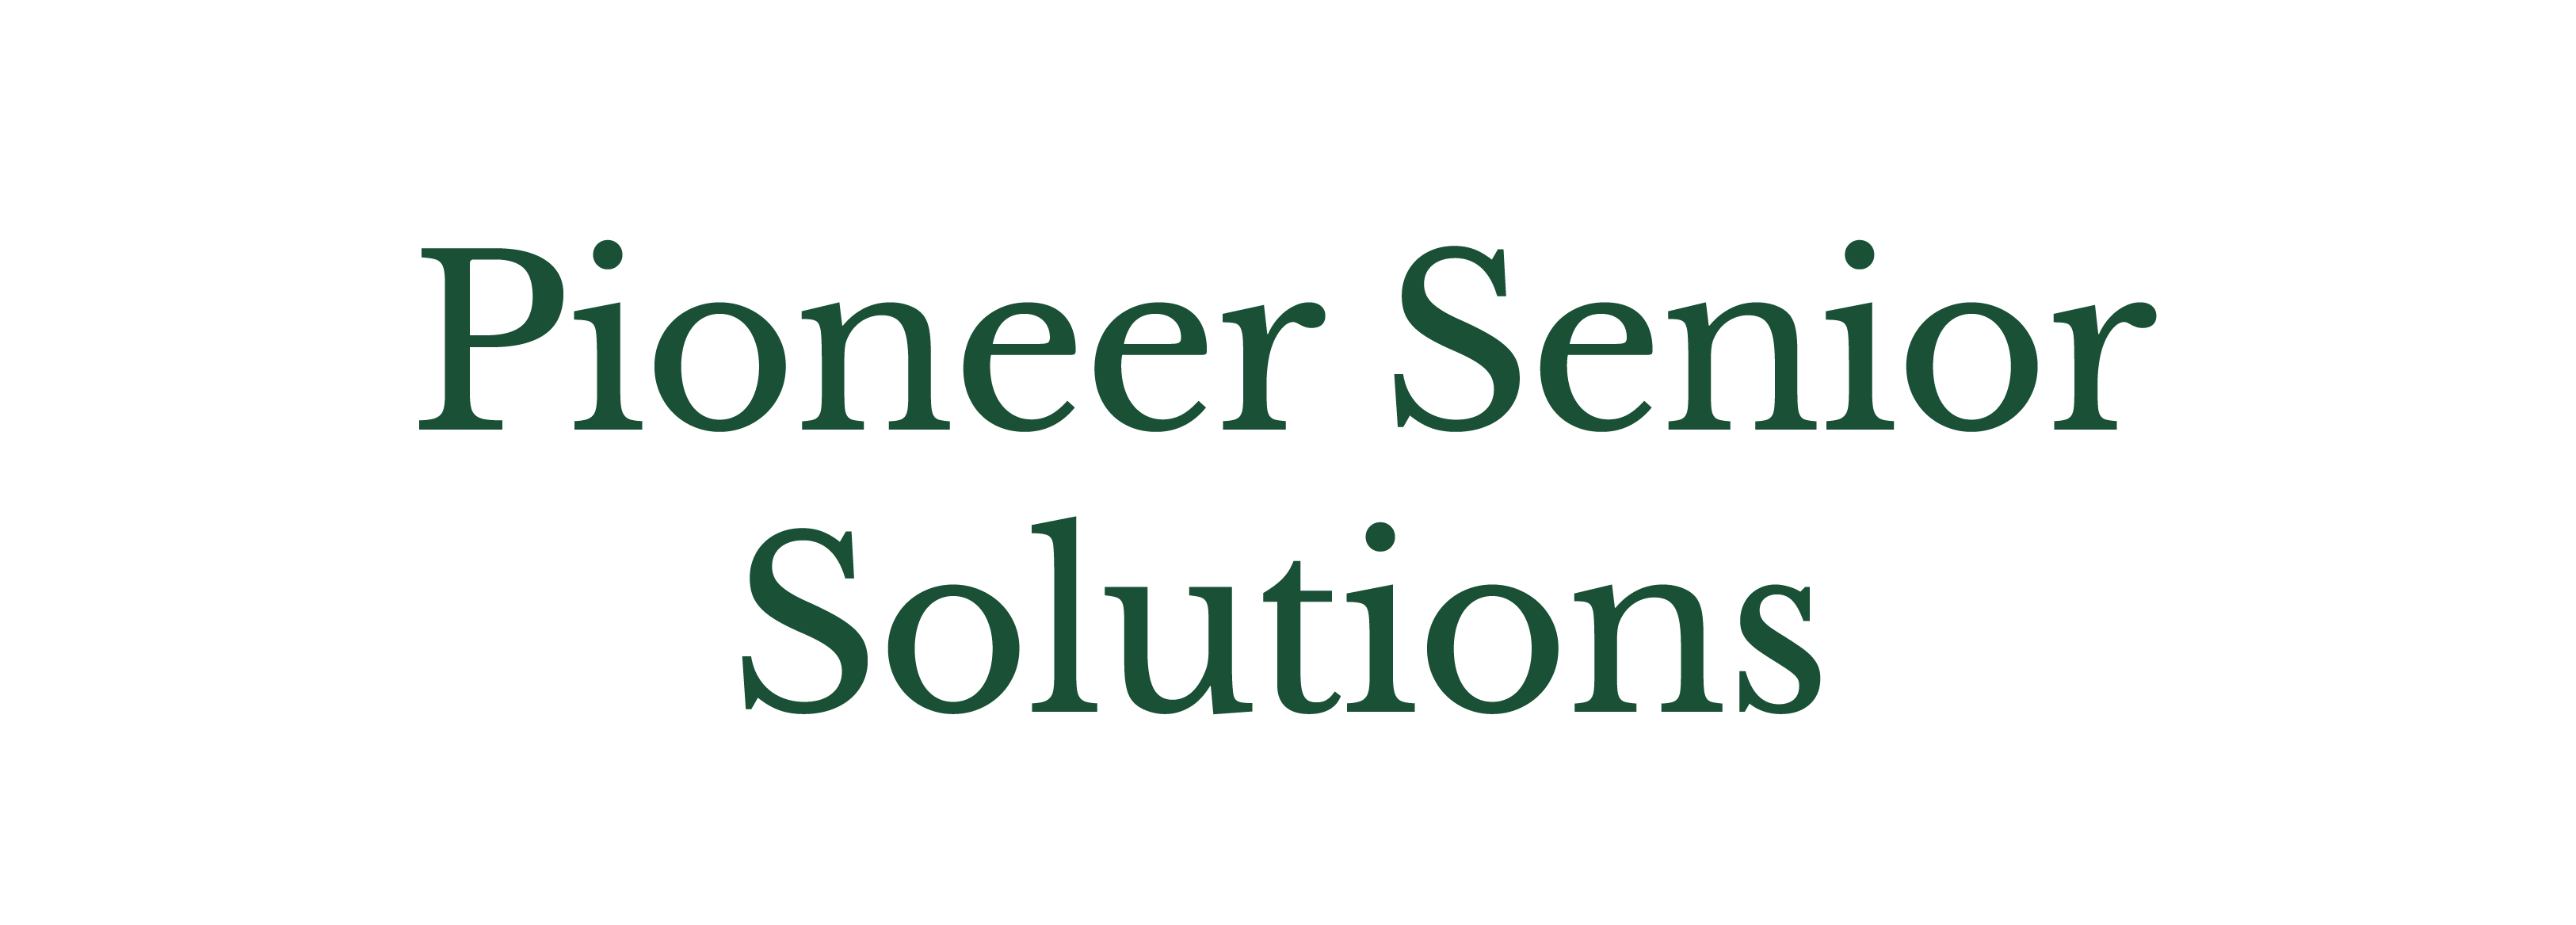 Pioneer Senior Solutions_Logo - Name Only